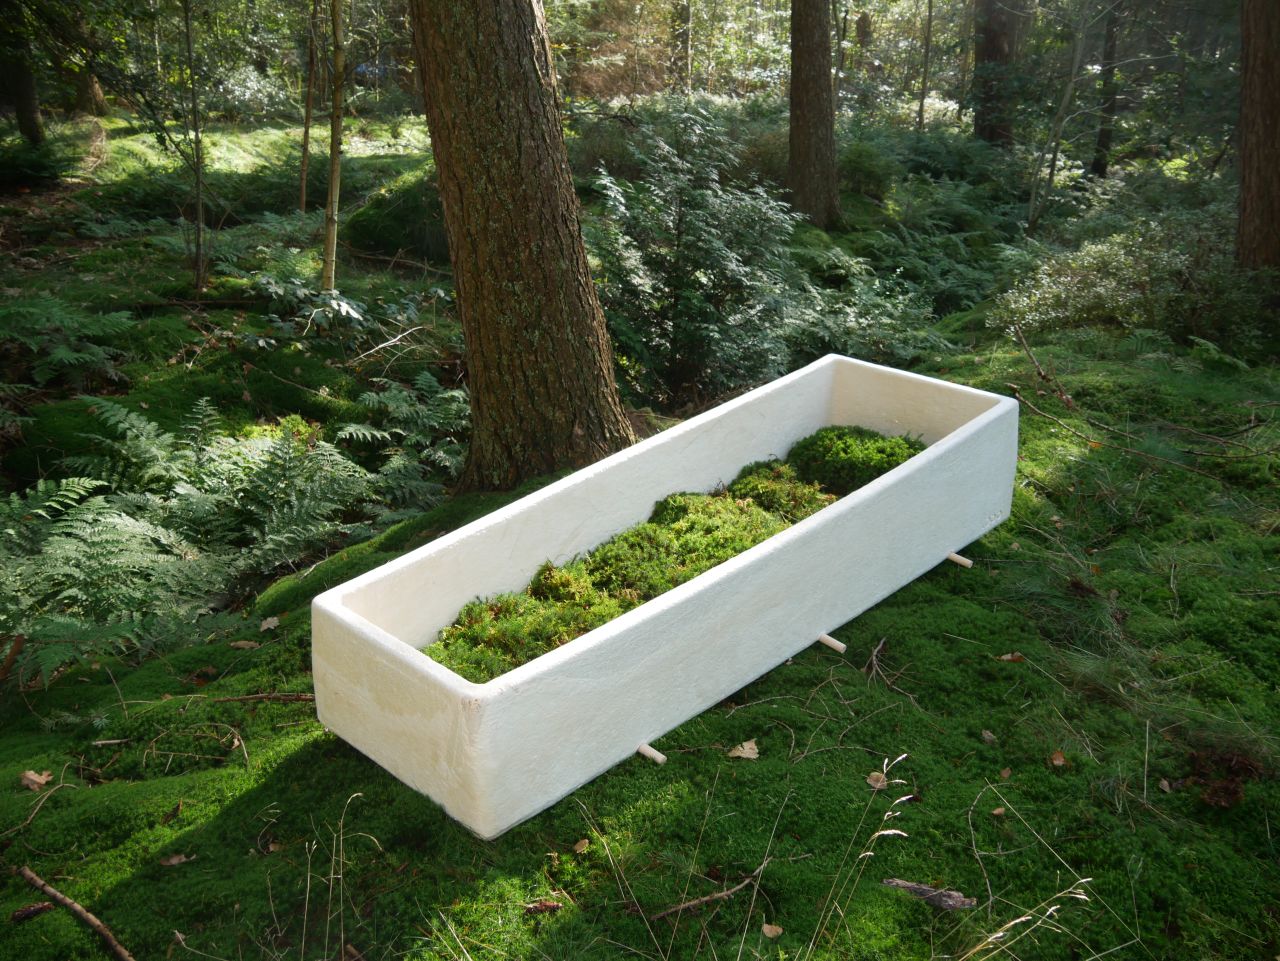 This "living cocoon" coffin, created by Dutch company Loop, is made from mycelium -- fungal fibers that usually live underground but can be cultivated in a laboratory. <strong>Look through the galley to learn more.</strong>